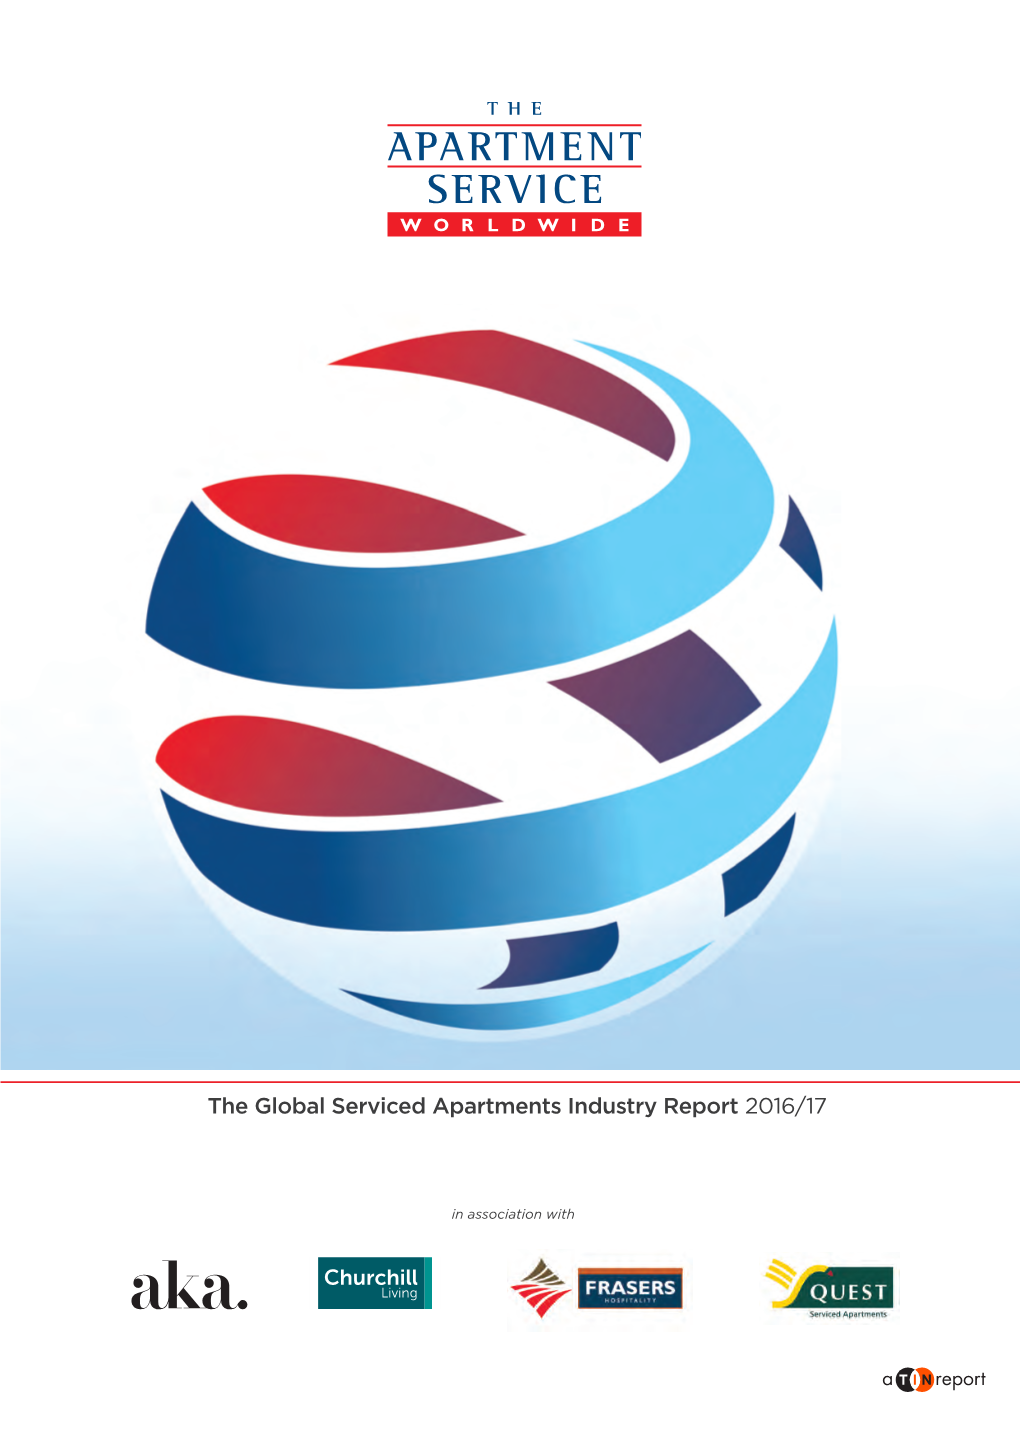 The Global Serviced Apartments Industry Report 2016/17